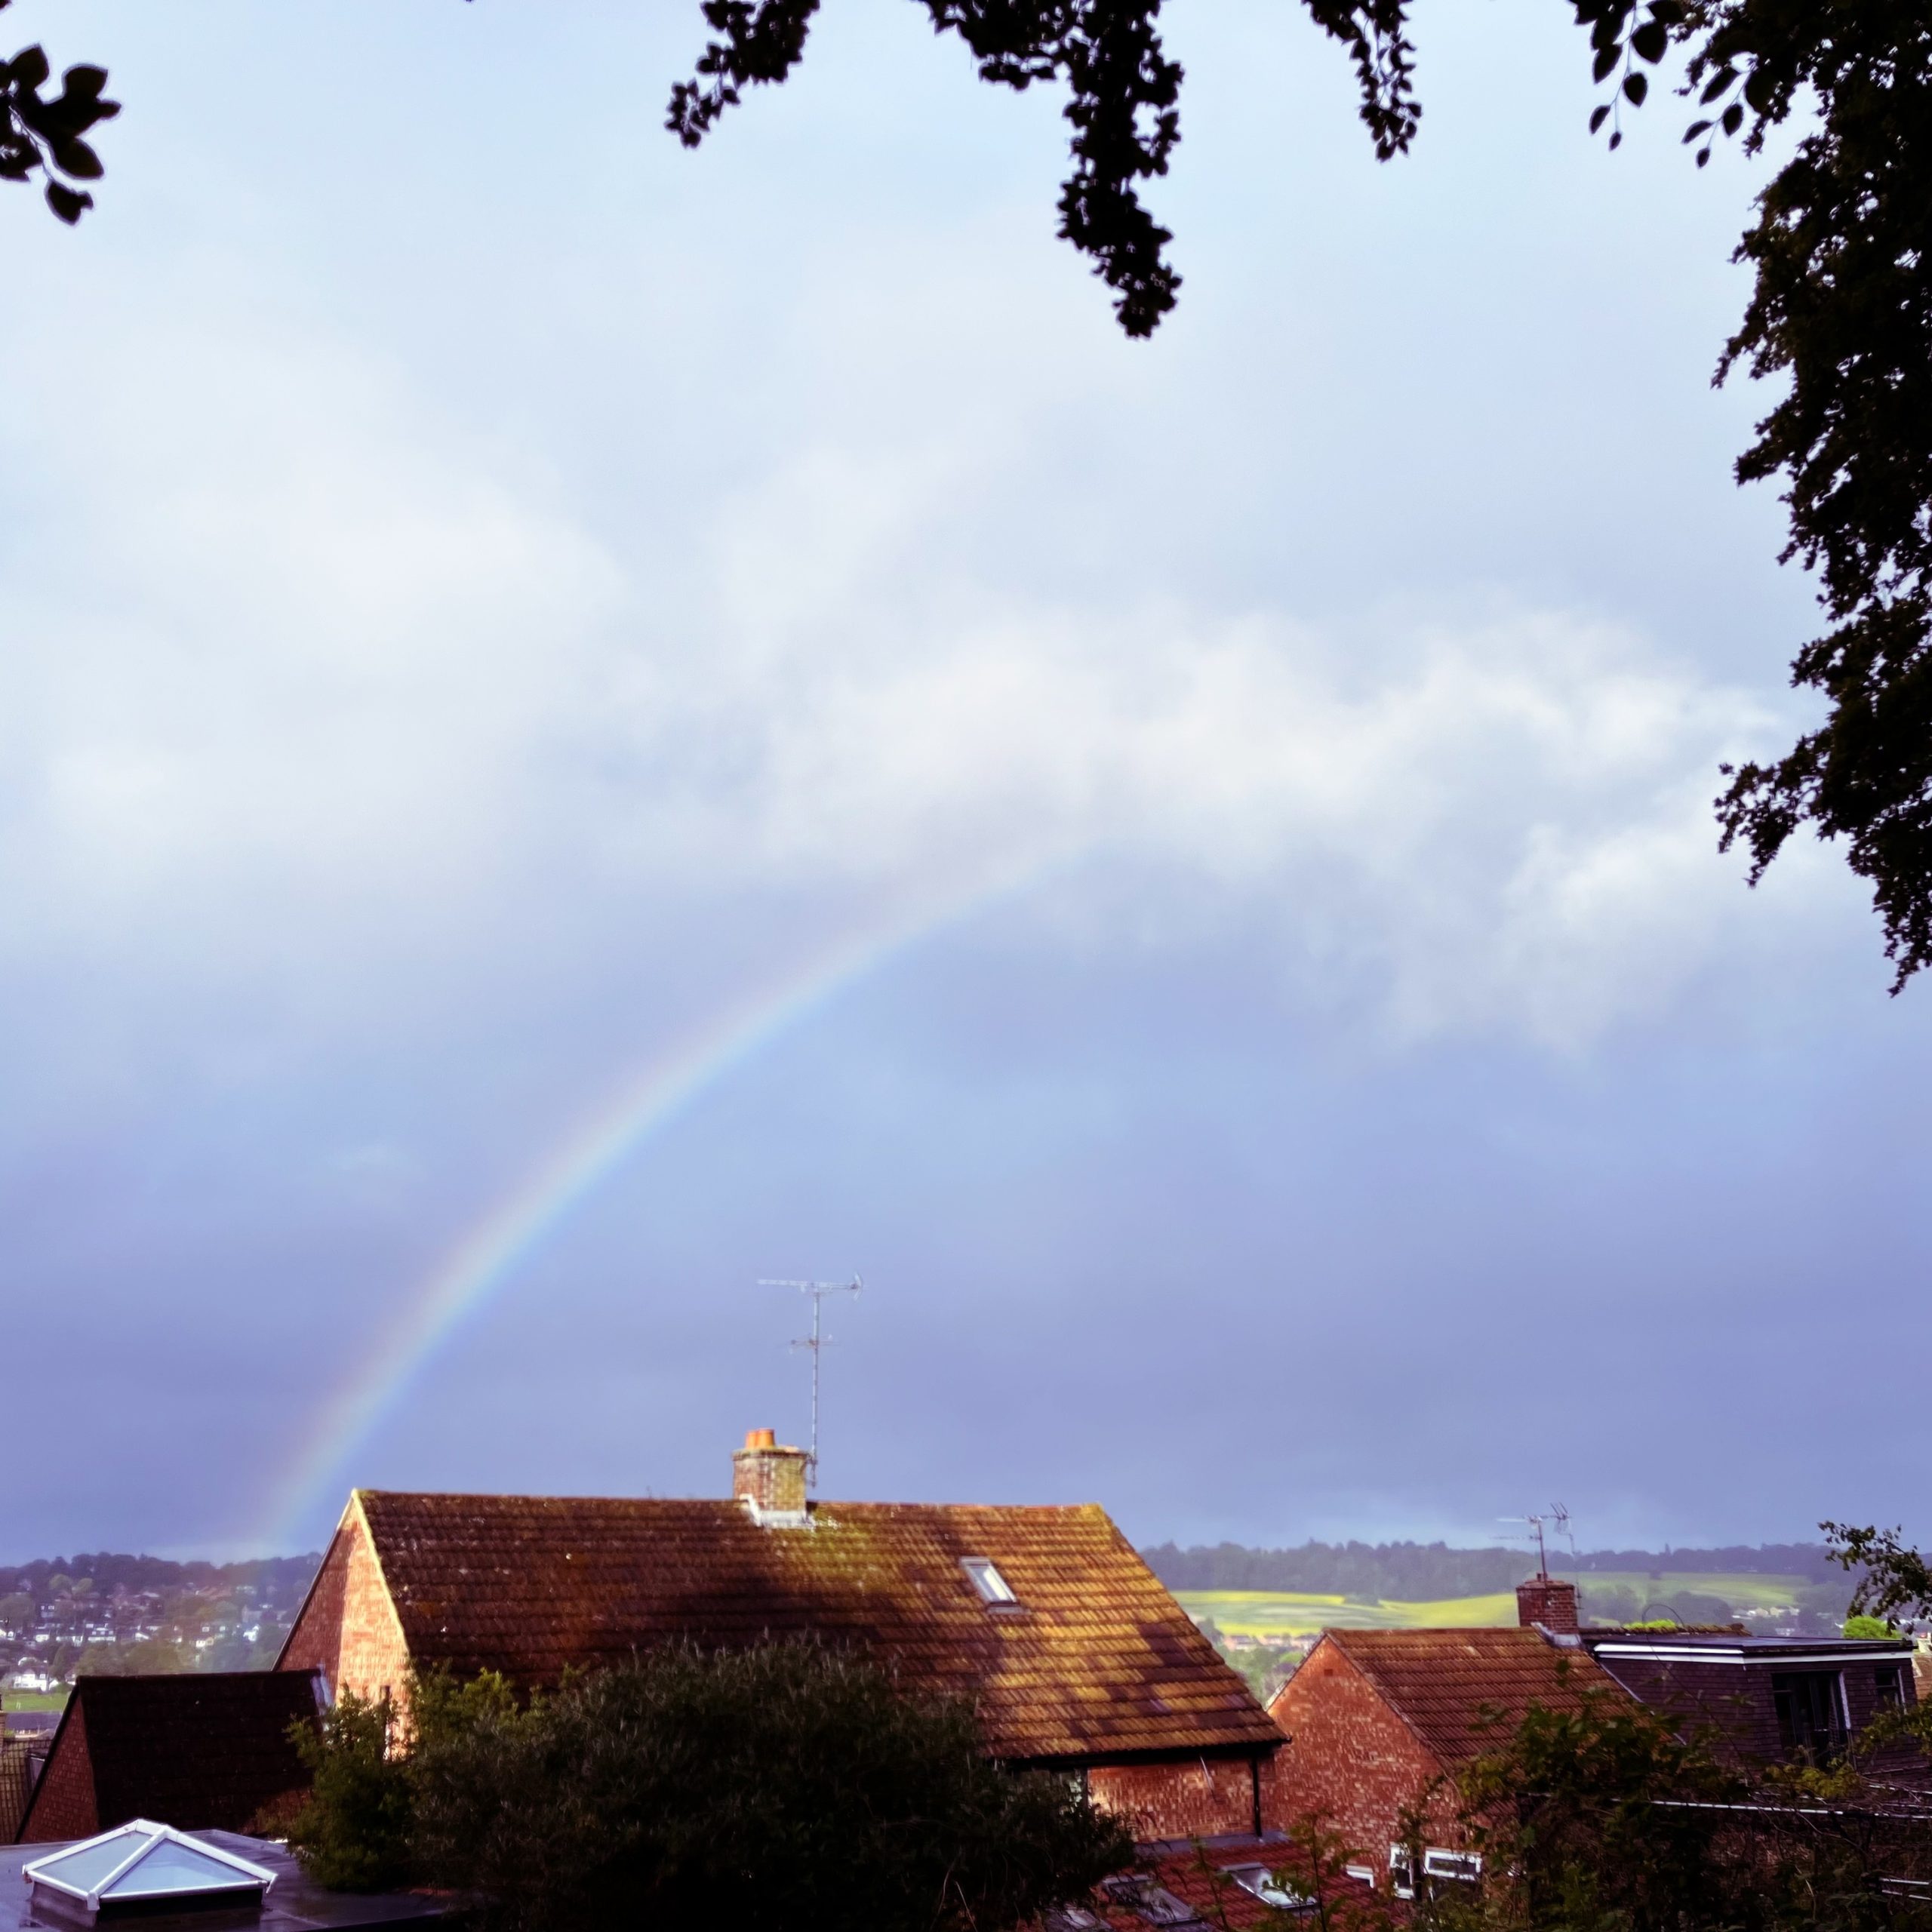 Caught this rainbow as I went out into the garden early one morning this week.